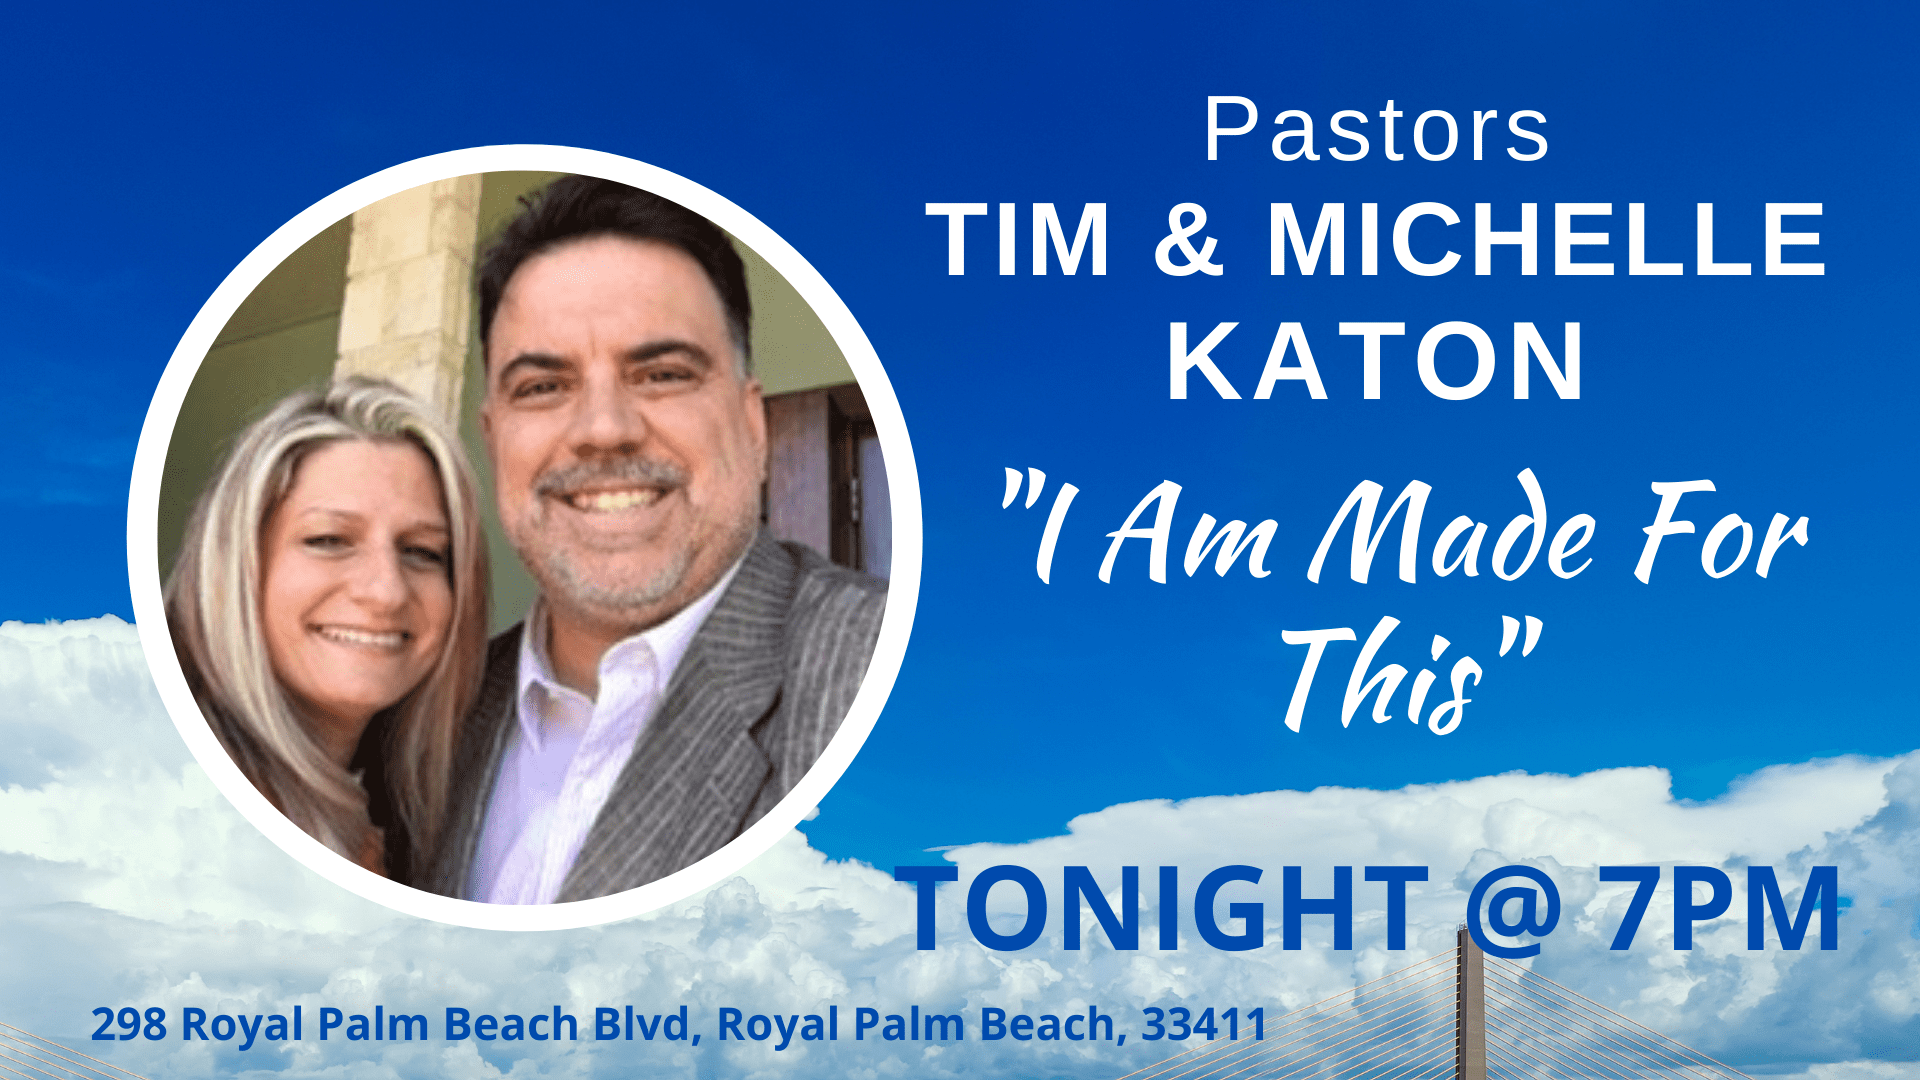 I AM MADE FOR THIS WITH PASTORS TIM & MICHELLE KATON